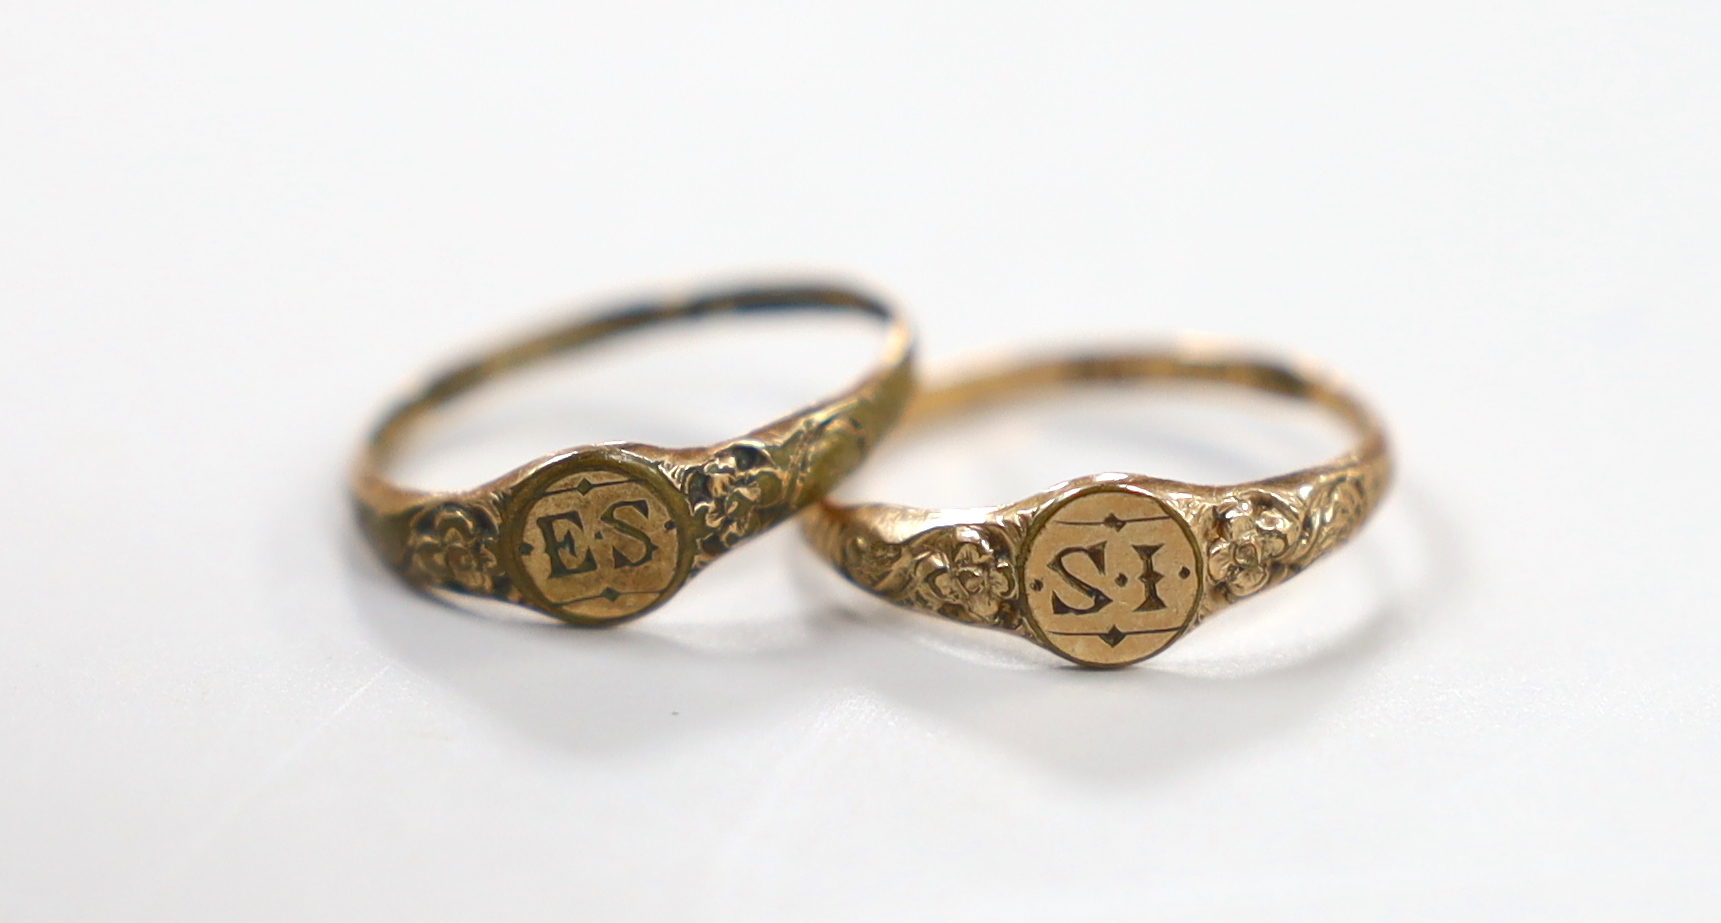 A pair of Georgian 'gold shell' child's rings, the rings heads with engraved initials, 'IS' and 'AS', sizes D/E and G.